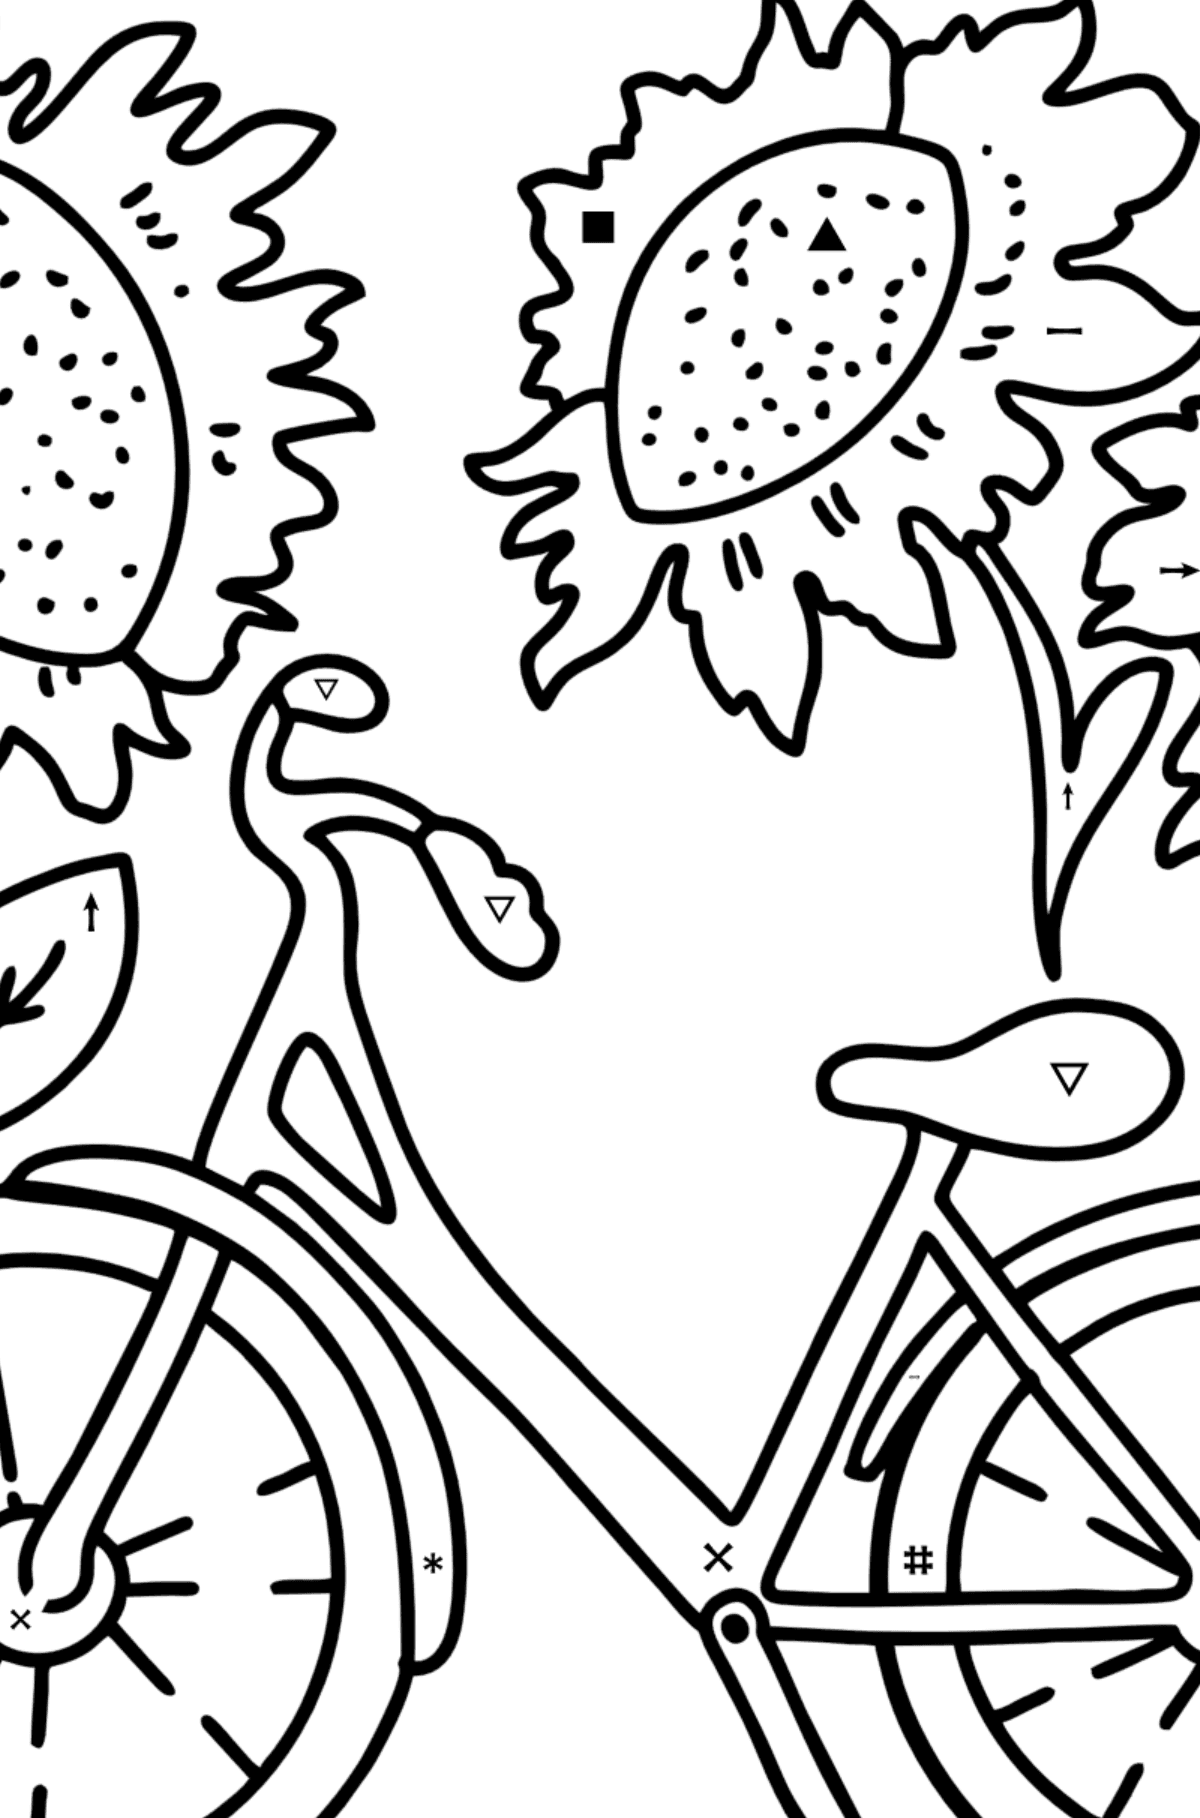 Summer Coloring page - Bicycle and Sunflowers - Coloring by Symbols for Kids